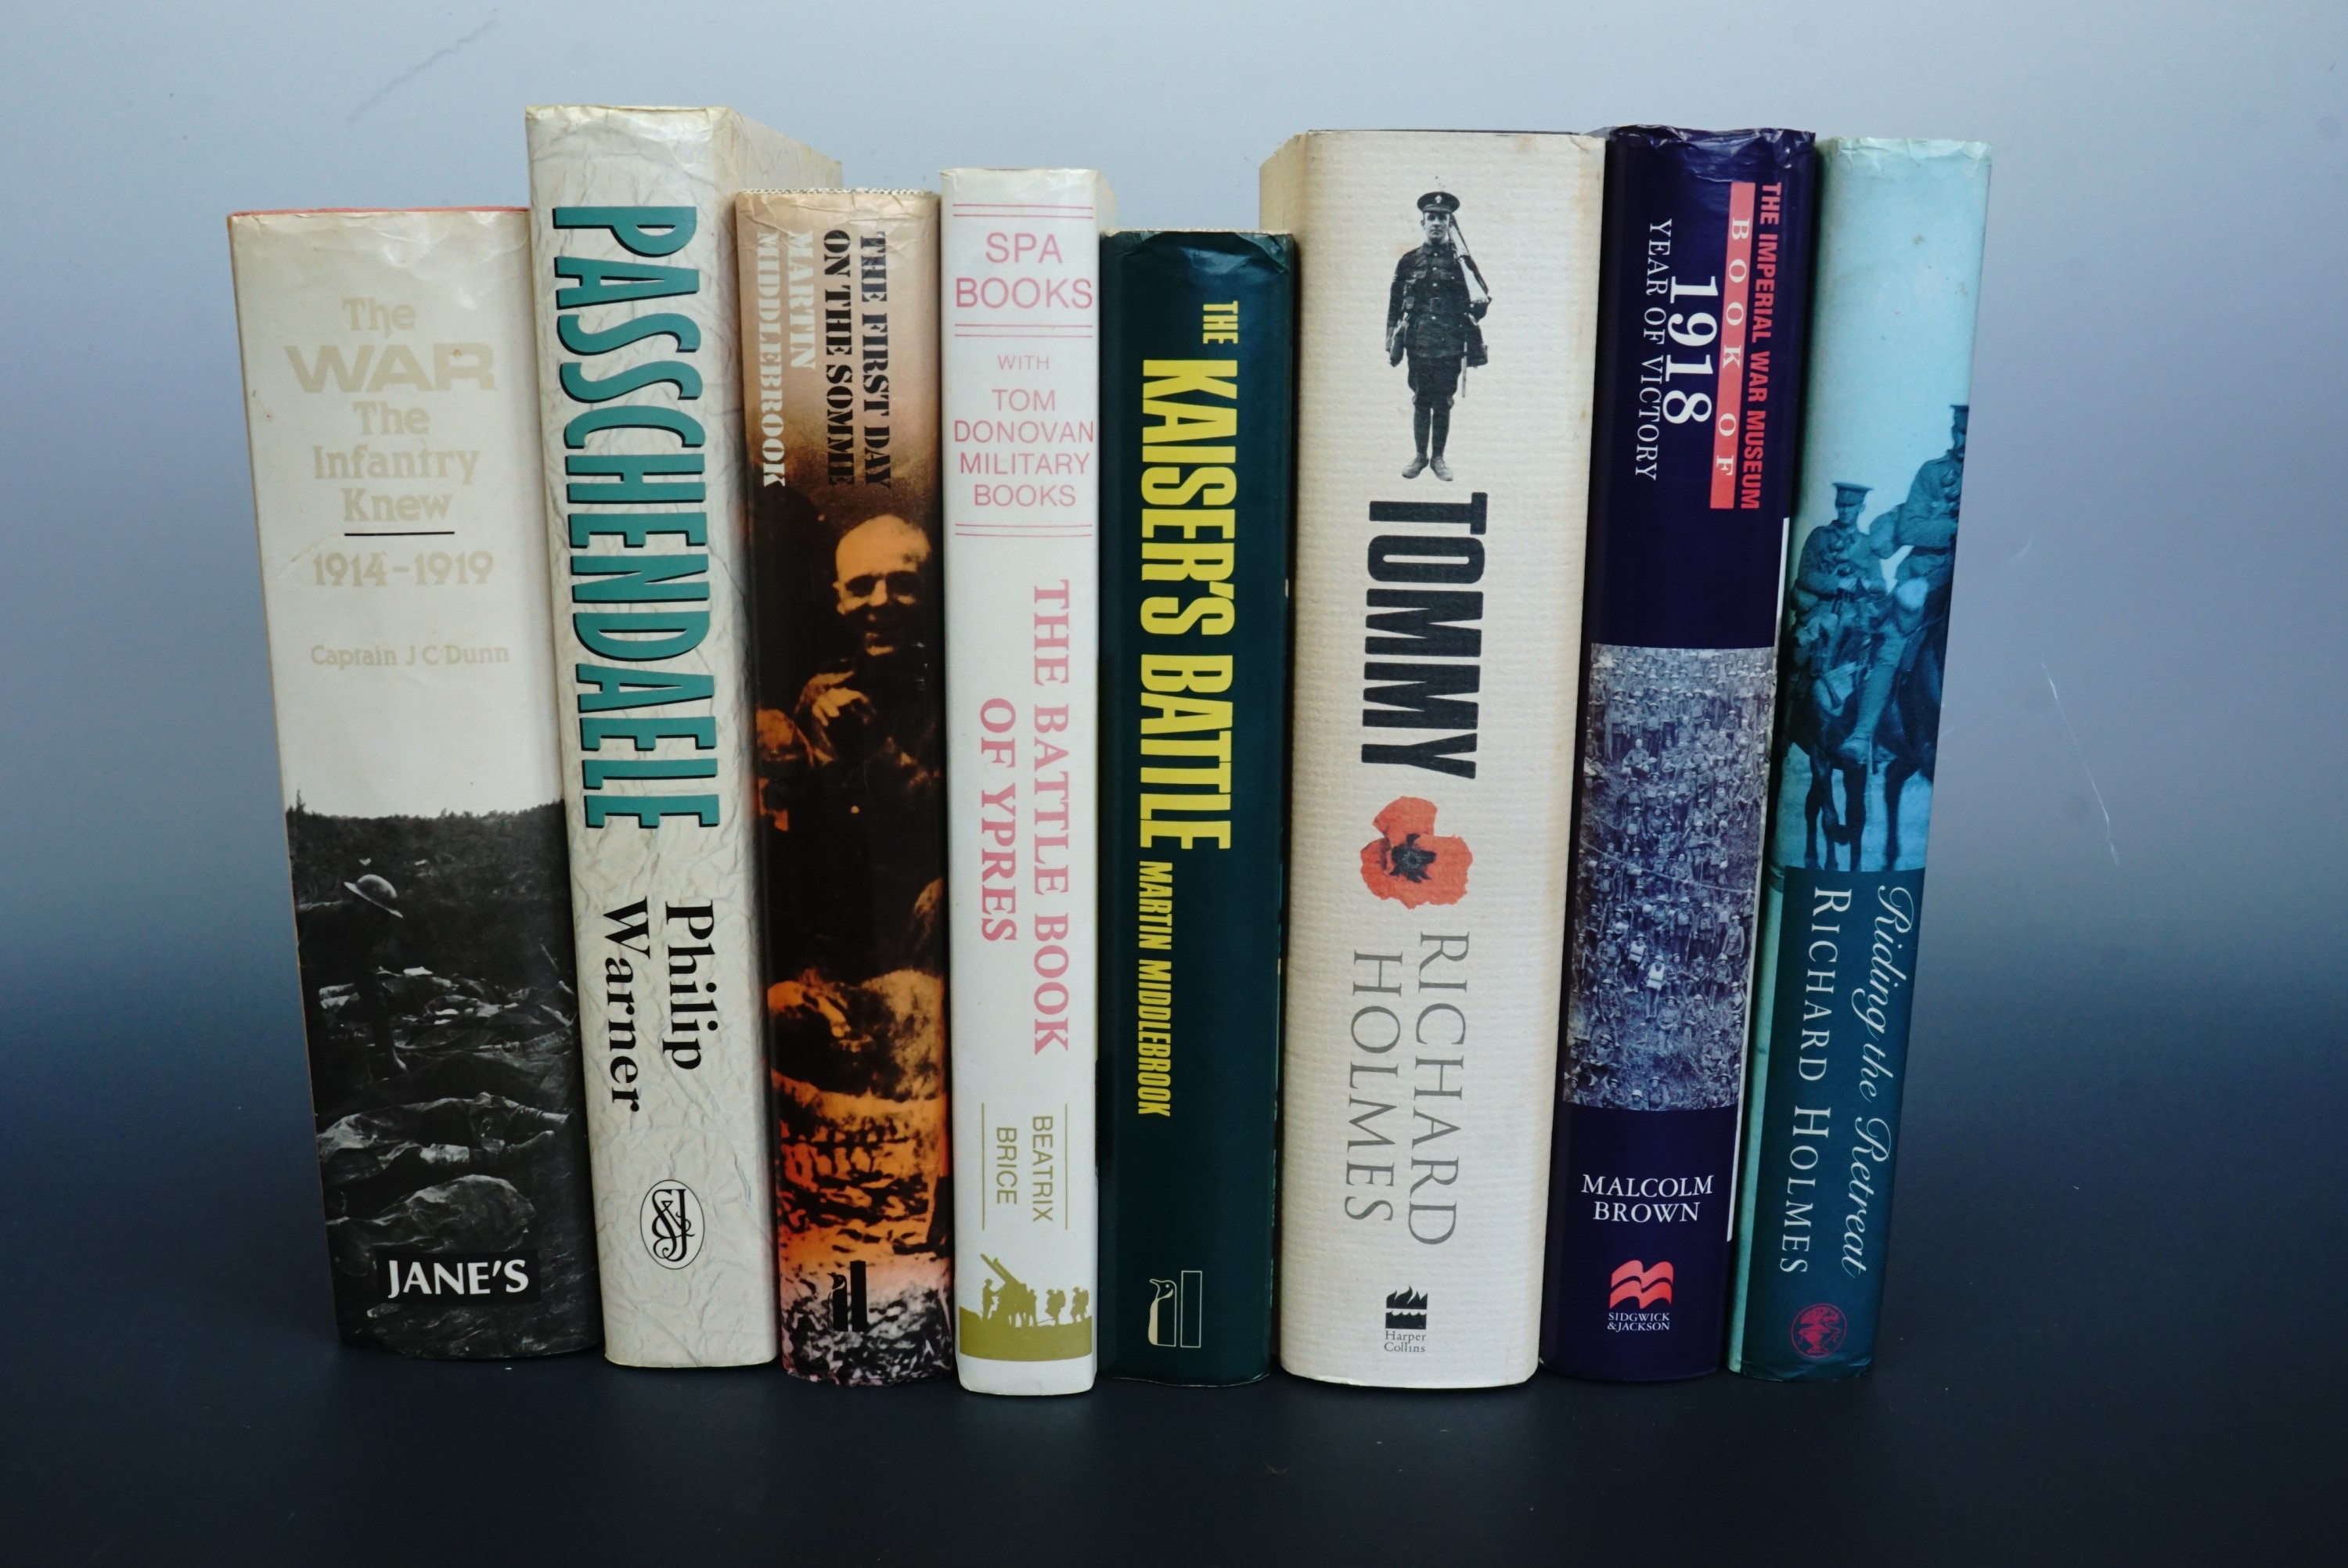 A quantity of books on the Great War